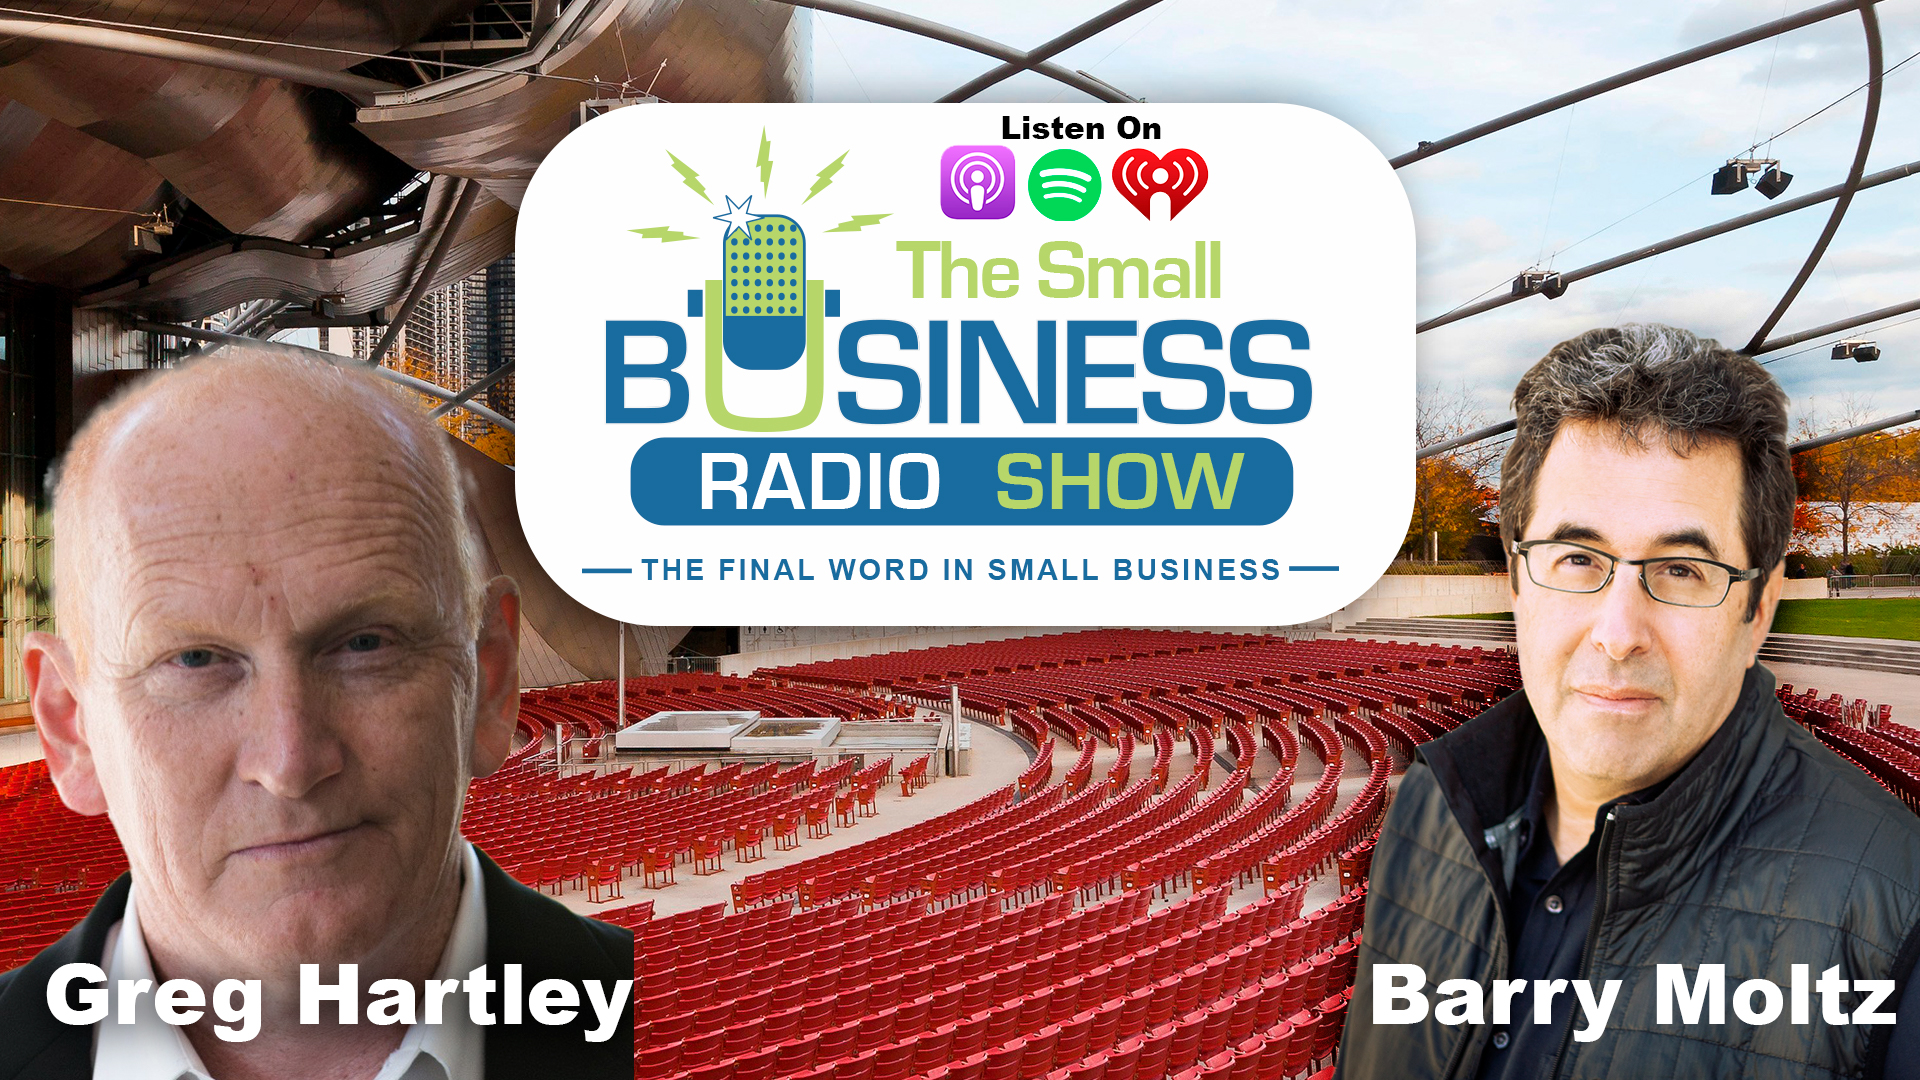 Greg Hartley on The Small Business Radio Show